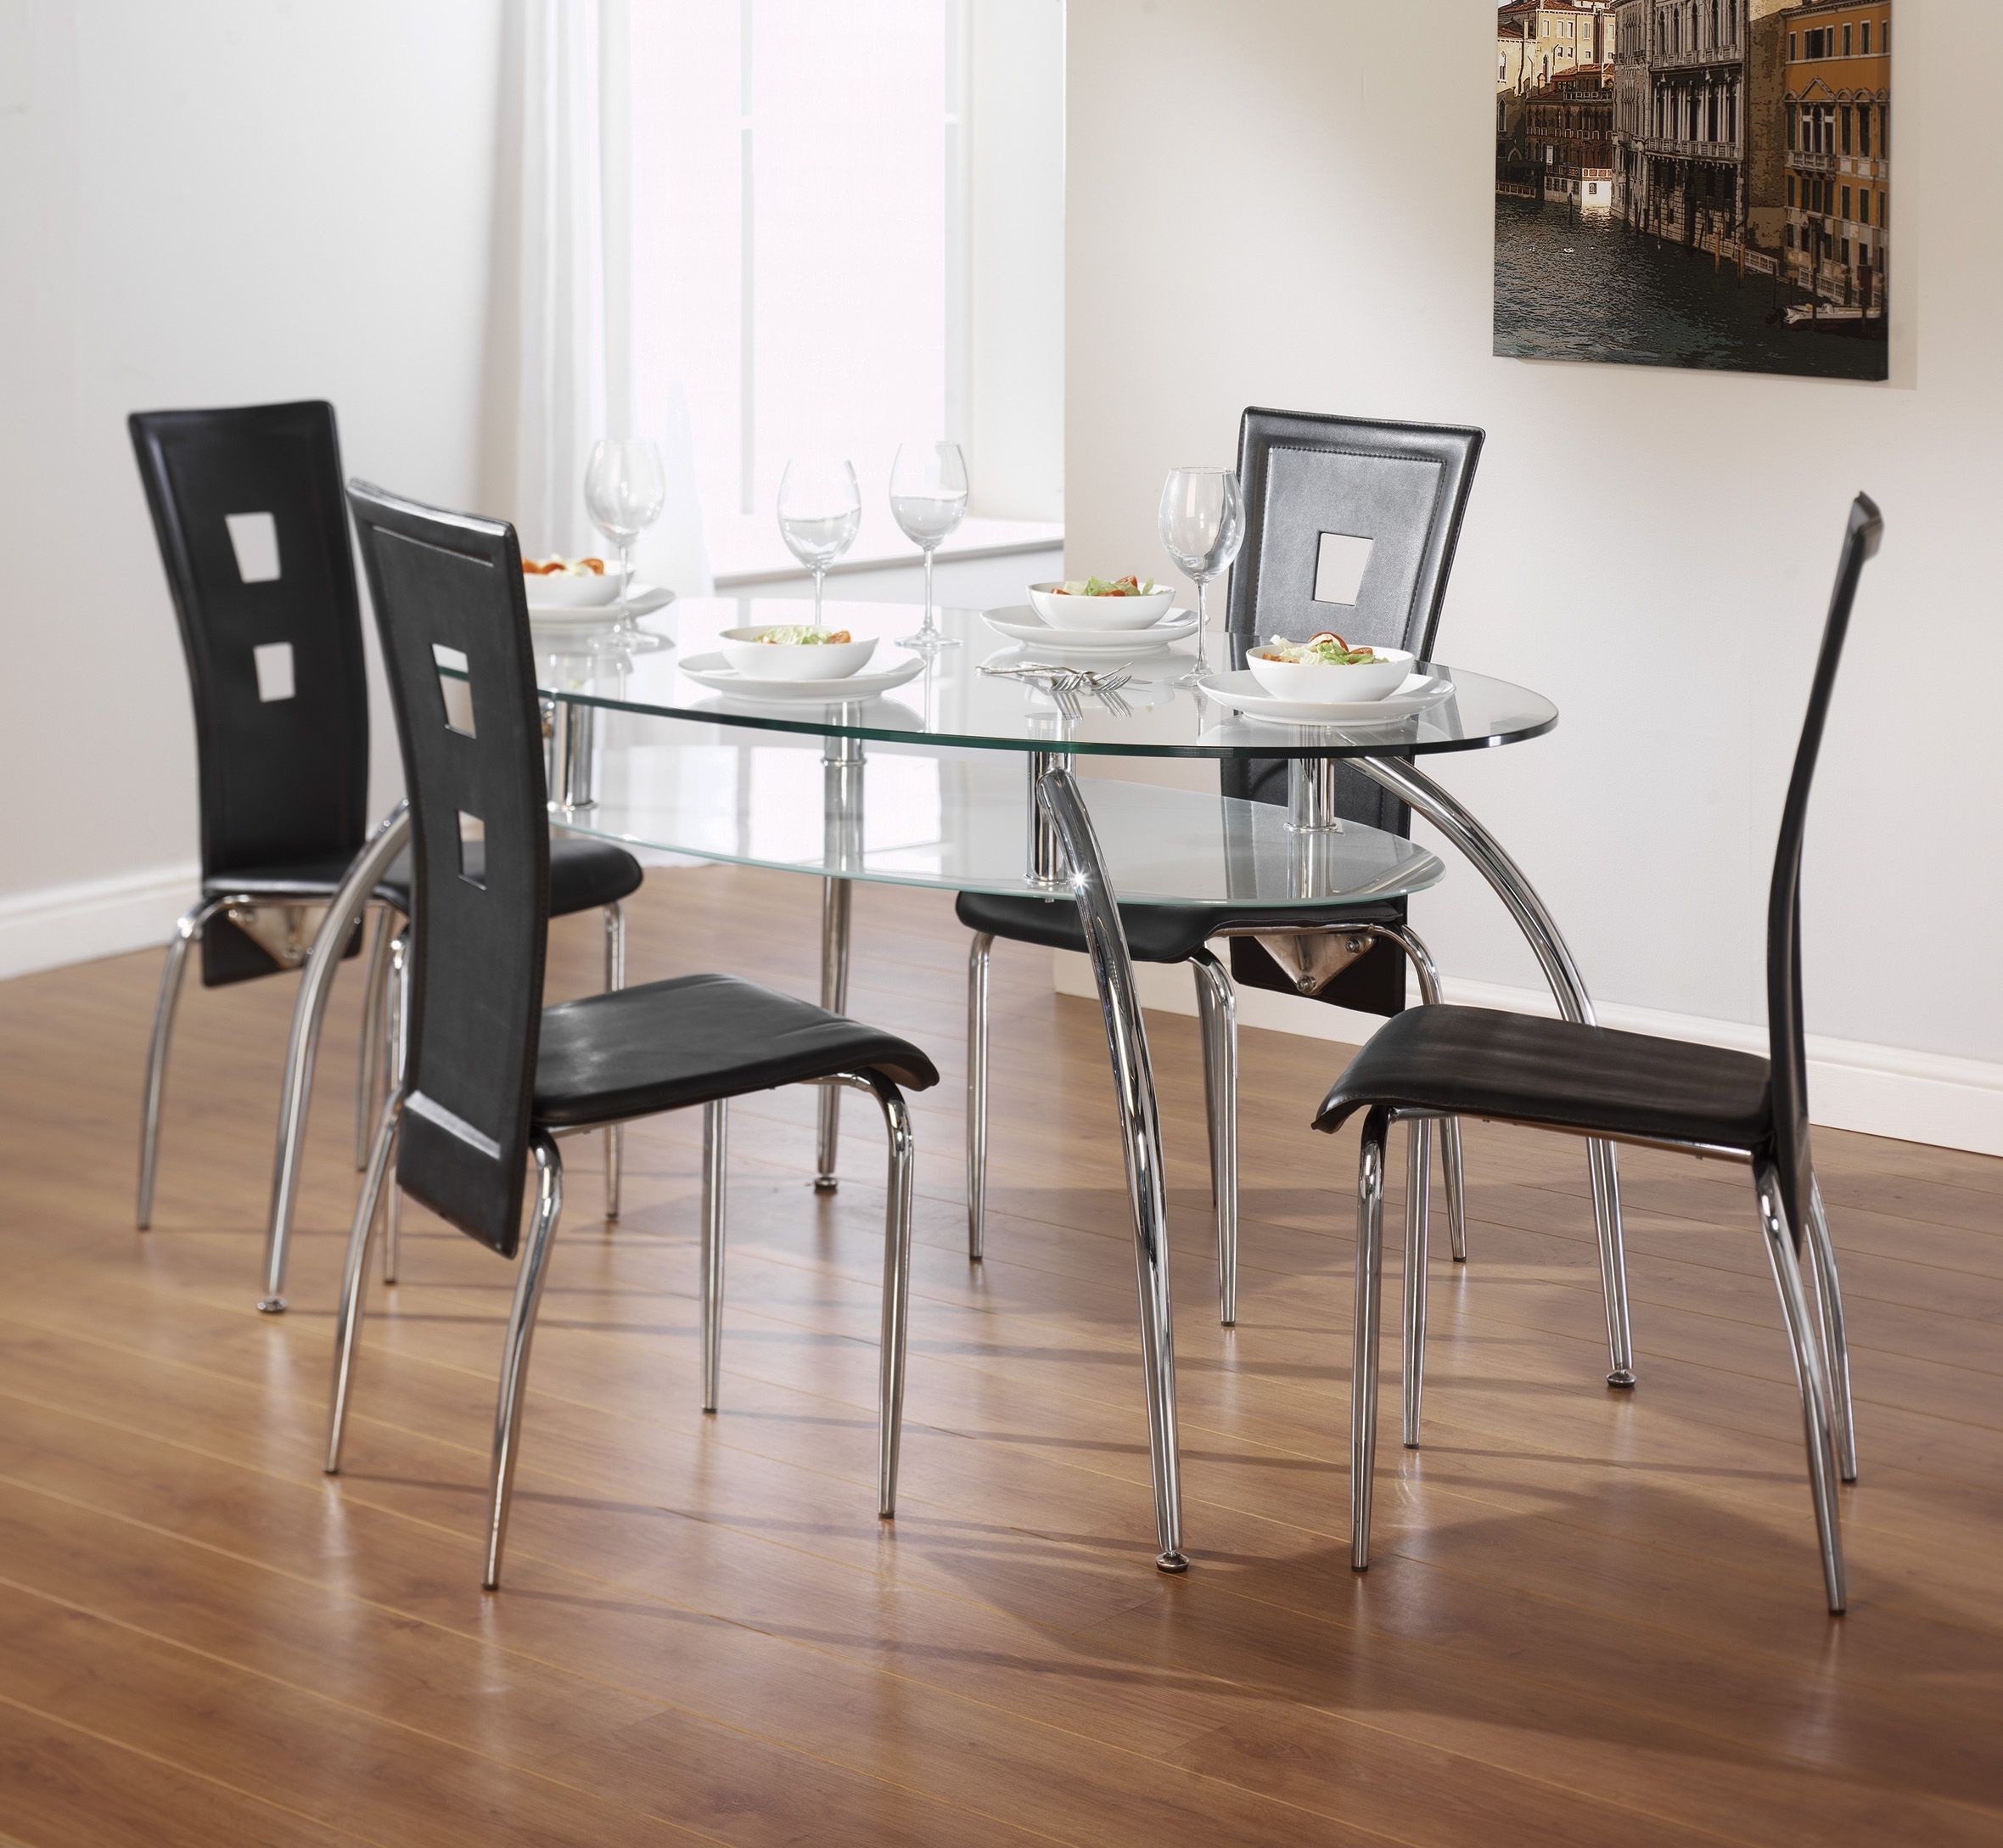 Most Recent Dining Tables At Aintree Liquidation Centre Throughout Round Glass Dining Tables With Oak Legs (View 23 of 25)